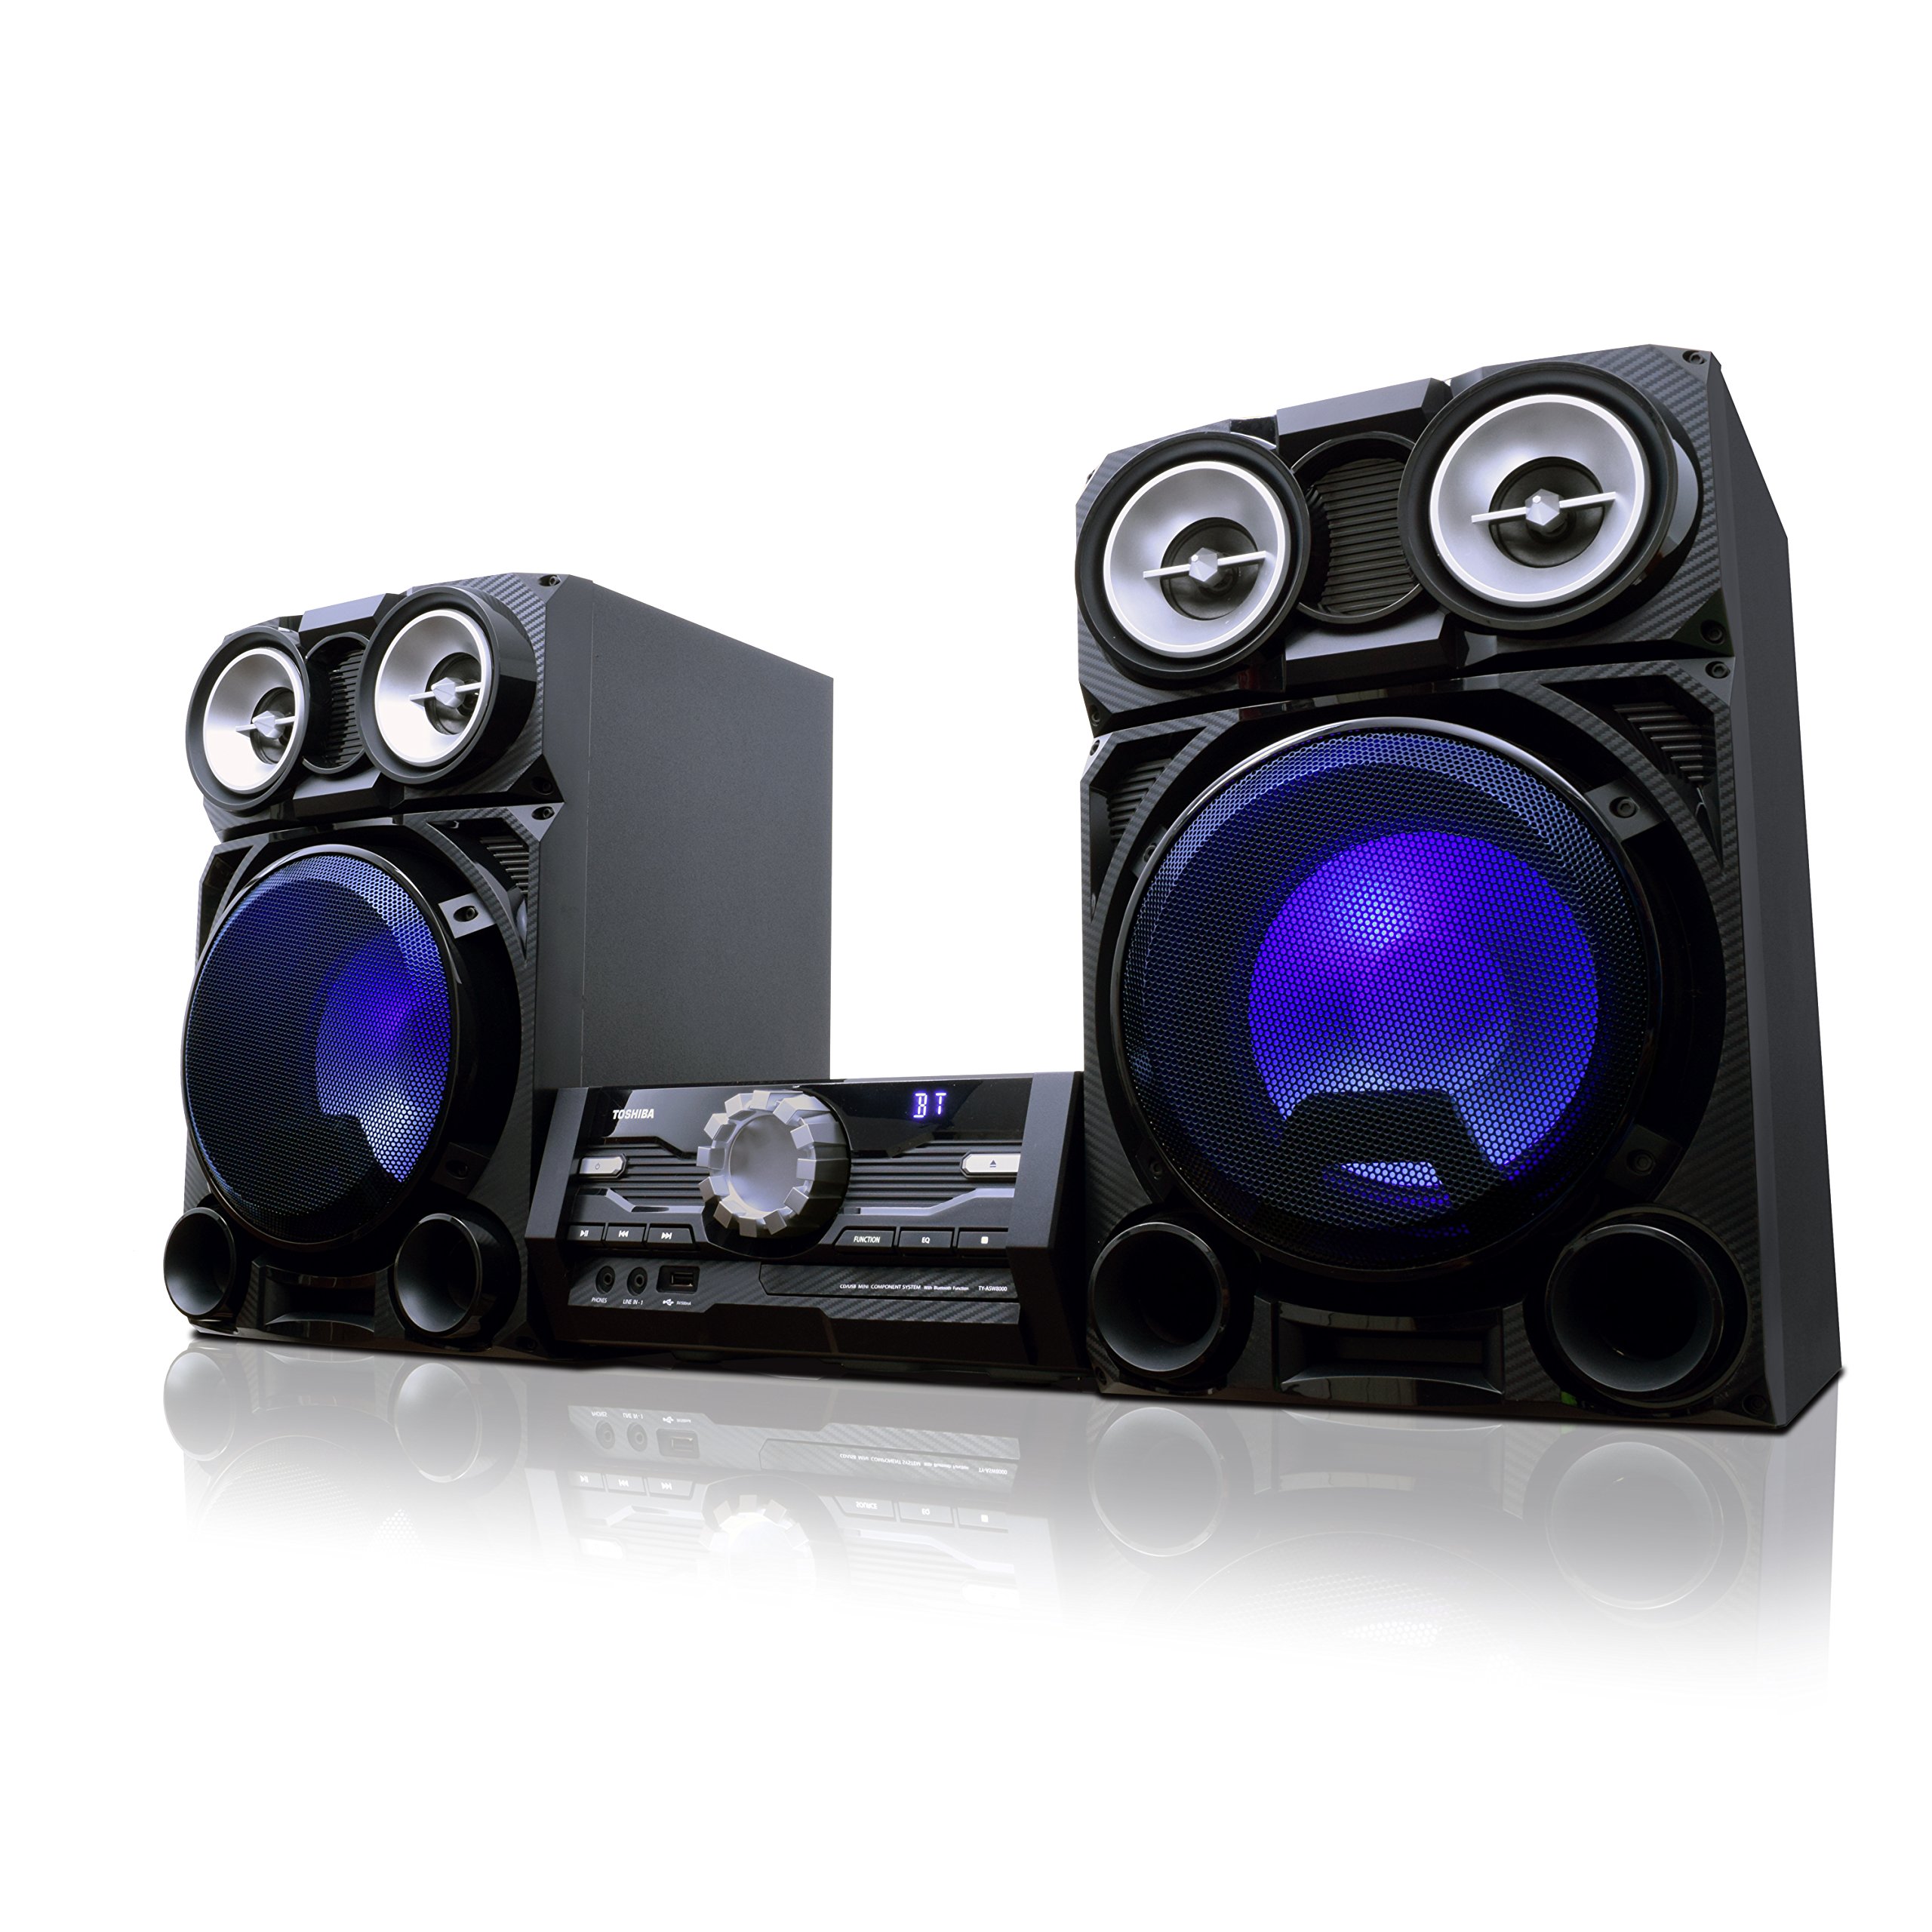 Toshiba TY-ASW8000 800 Watt Bluetooth Stereo Sound System: Wireless Mini Component Home Speaker System with LED Lights